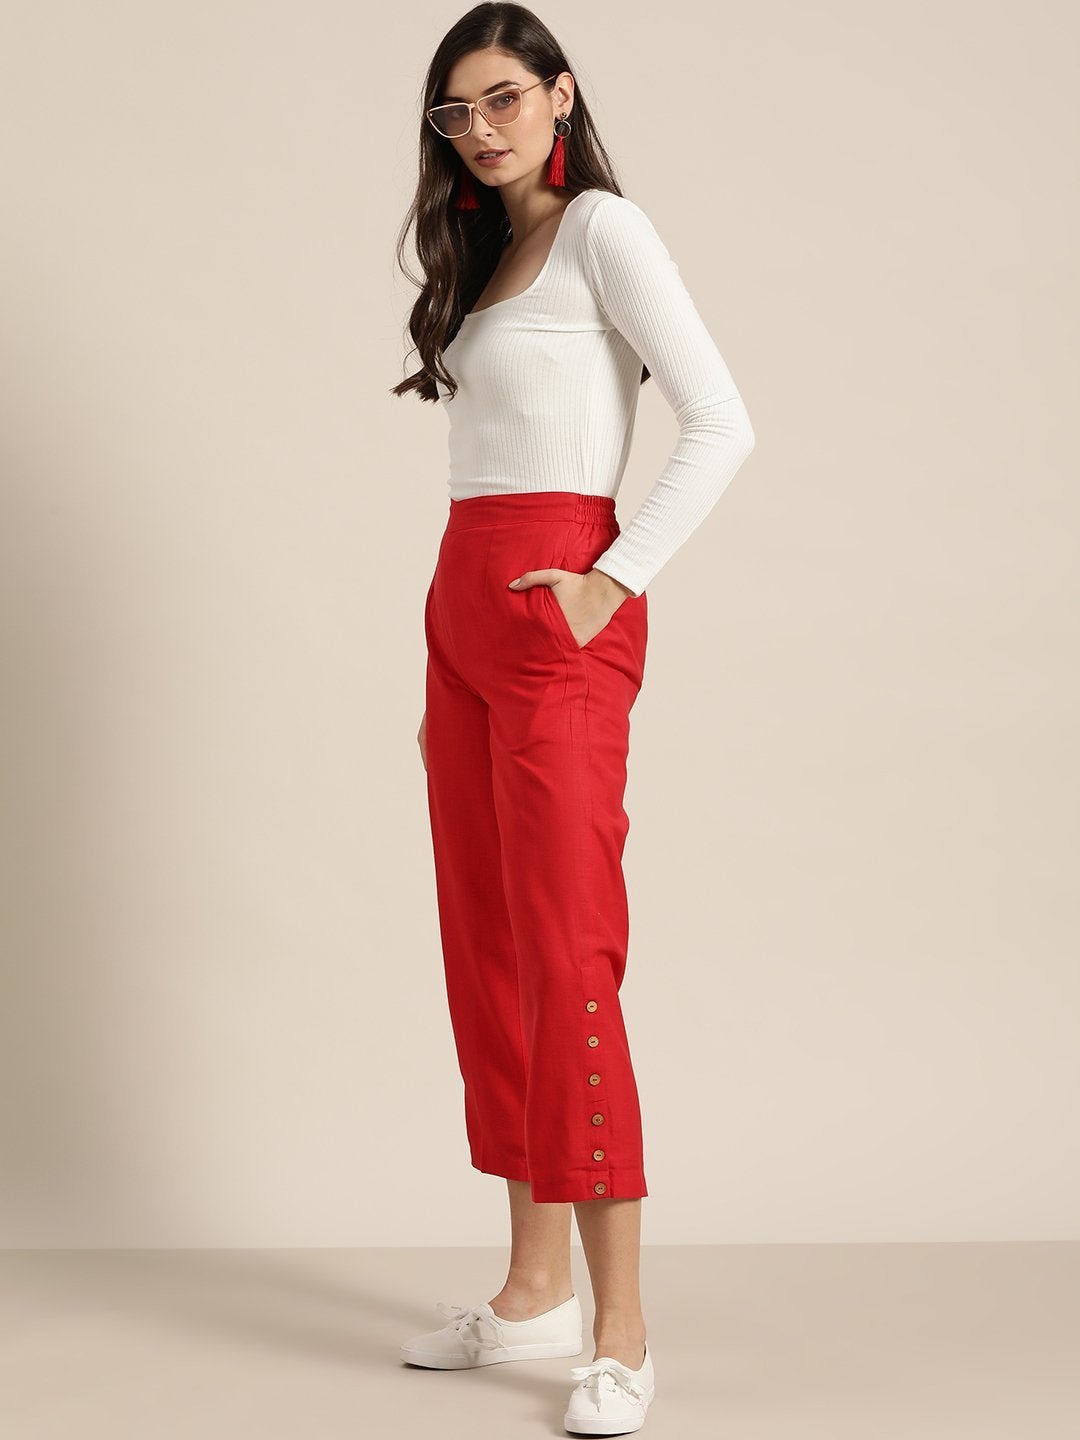 Women's Red Side Button Placket Pants - SHAE